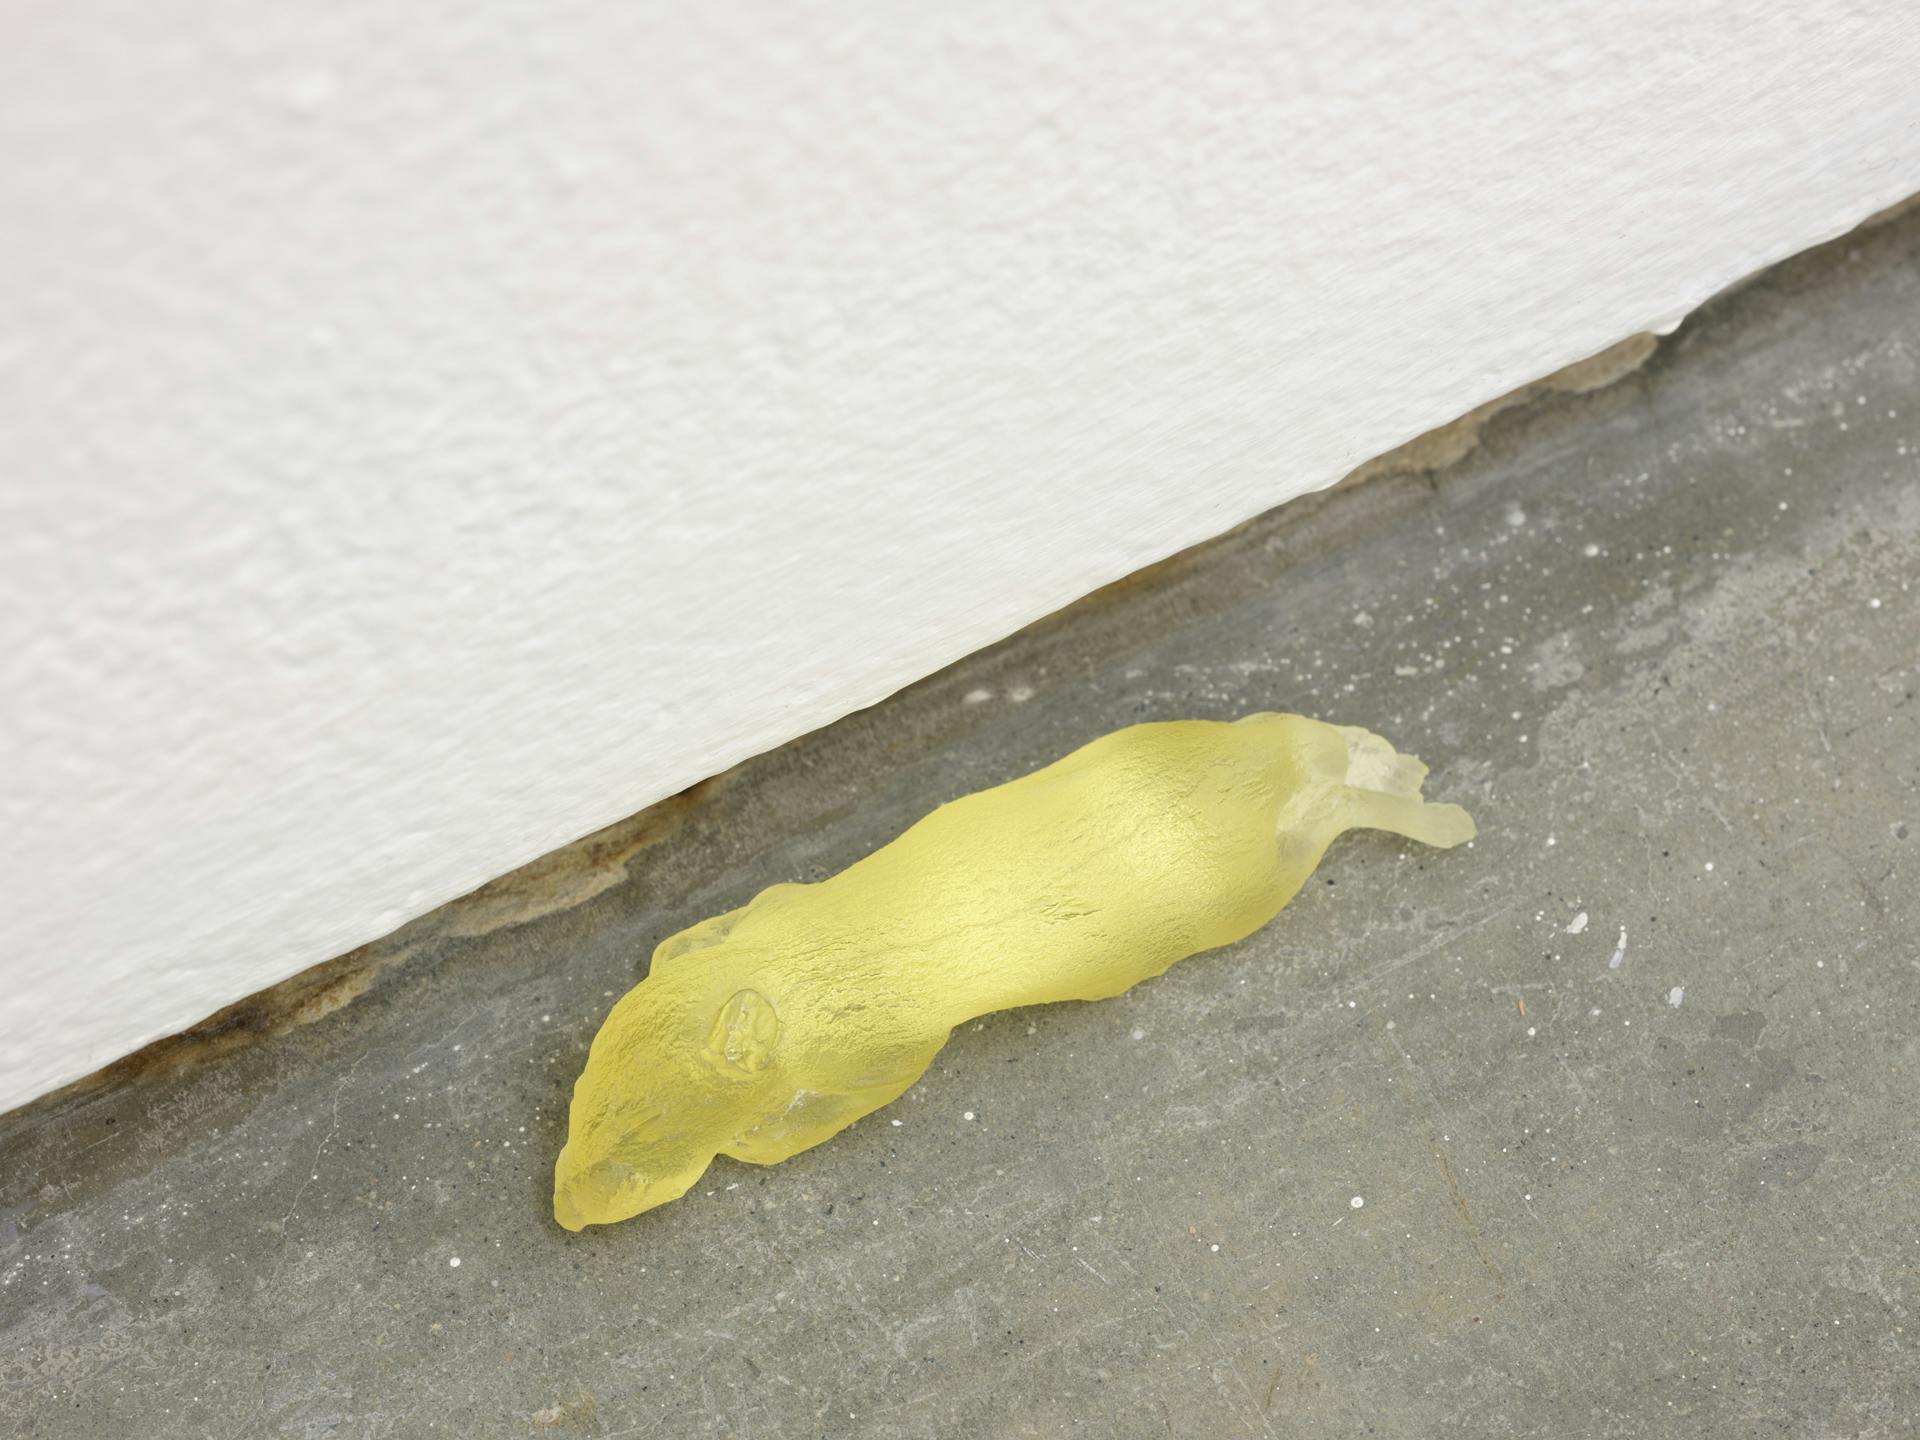 A yellow-coloured cast glass sculpture depicting a rat pup sits near the intersection of the floor and a wall.